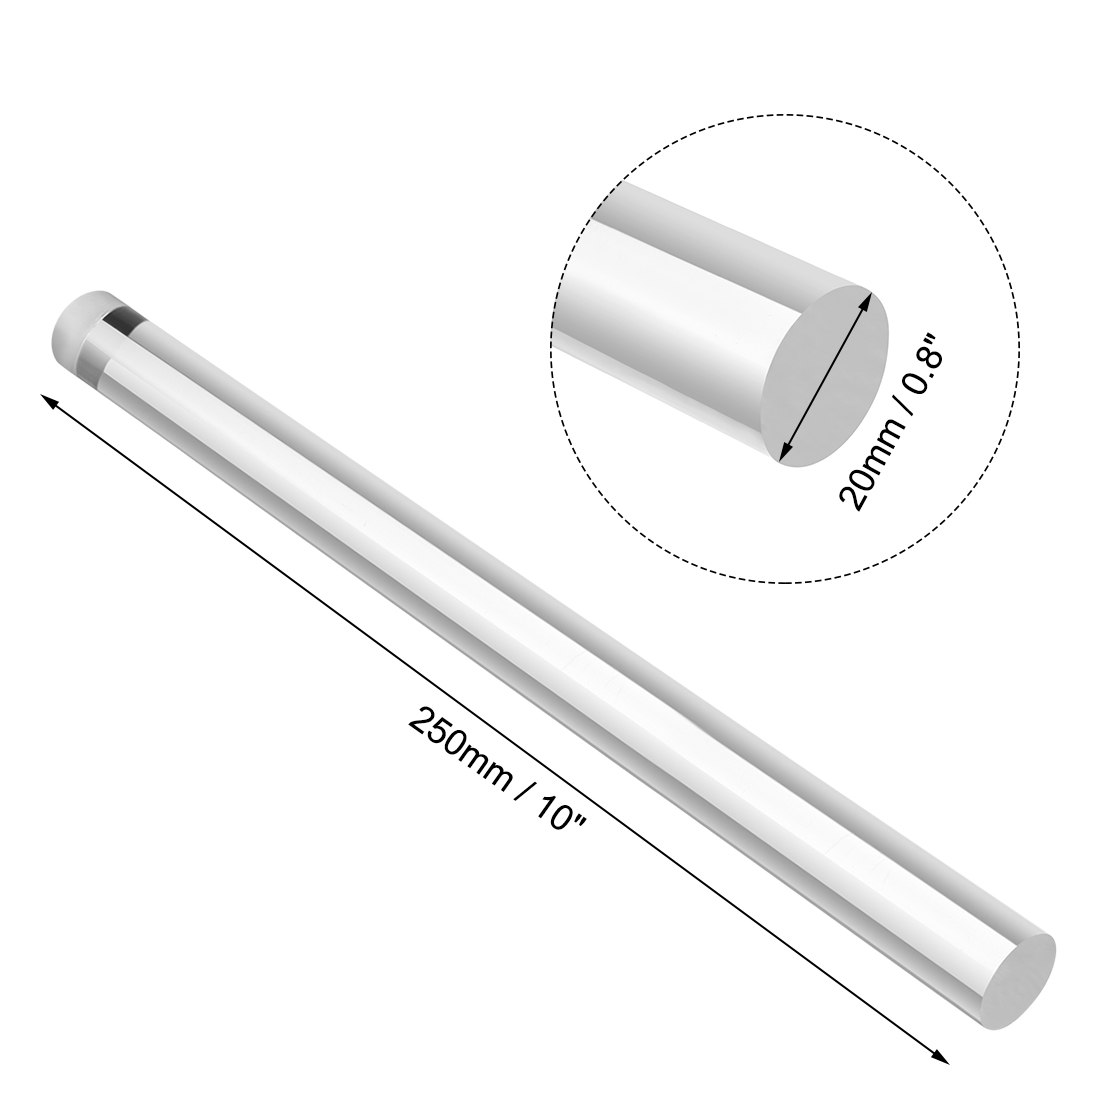 Square-Shaped Acrylic plexiglass Rod PMMA bar 0.6 inches x 0.6 inches x 10 inches Transparent 2 Pieces 